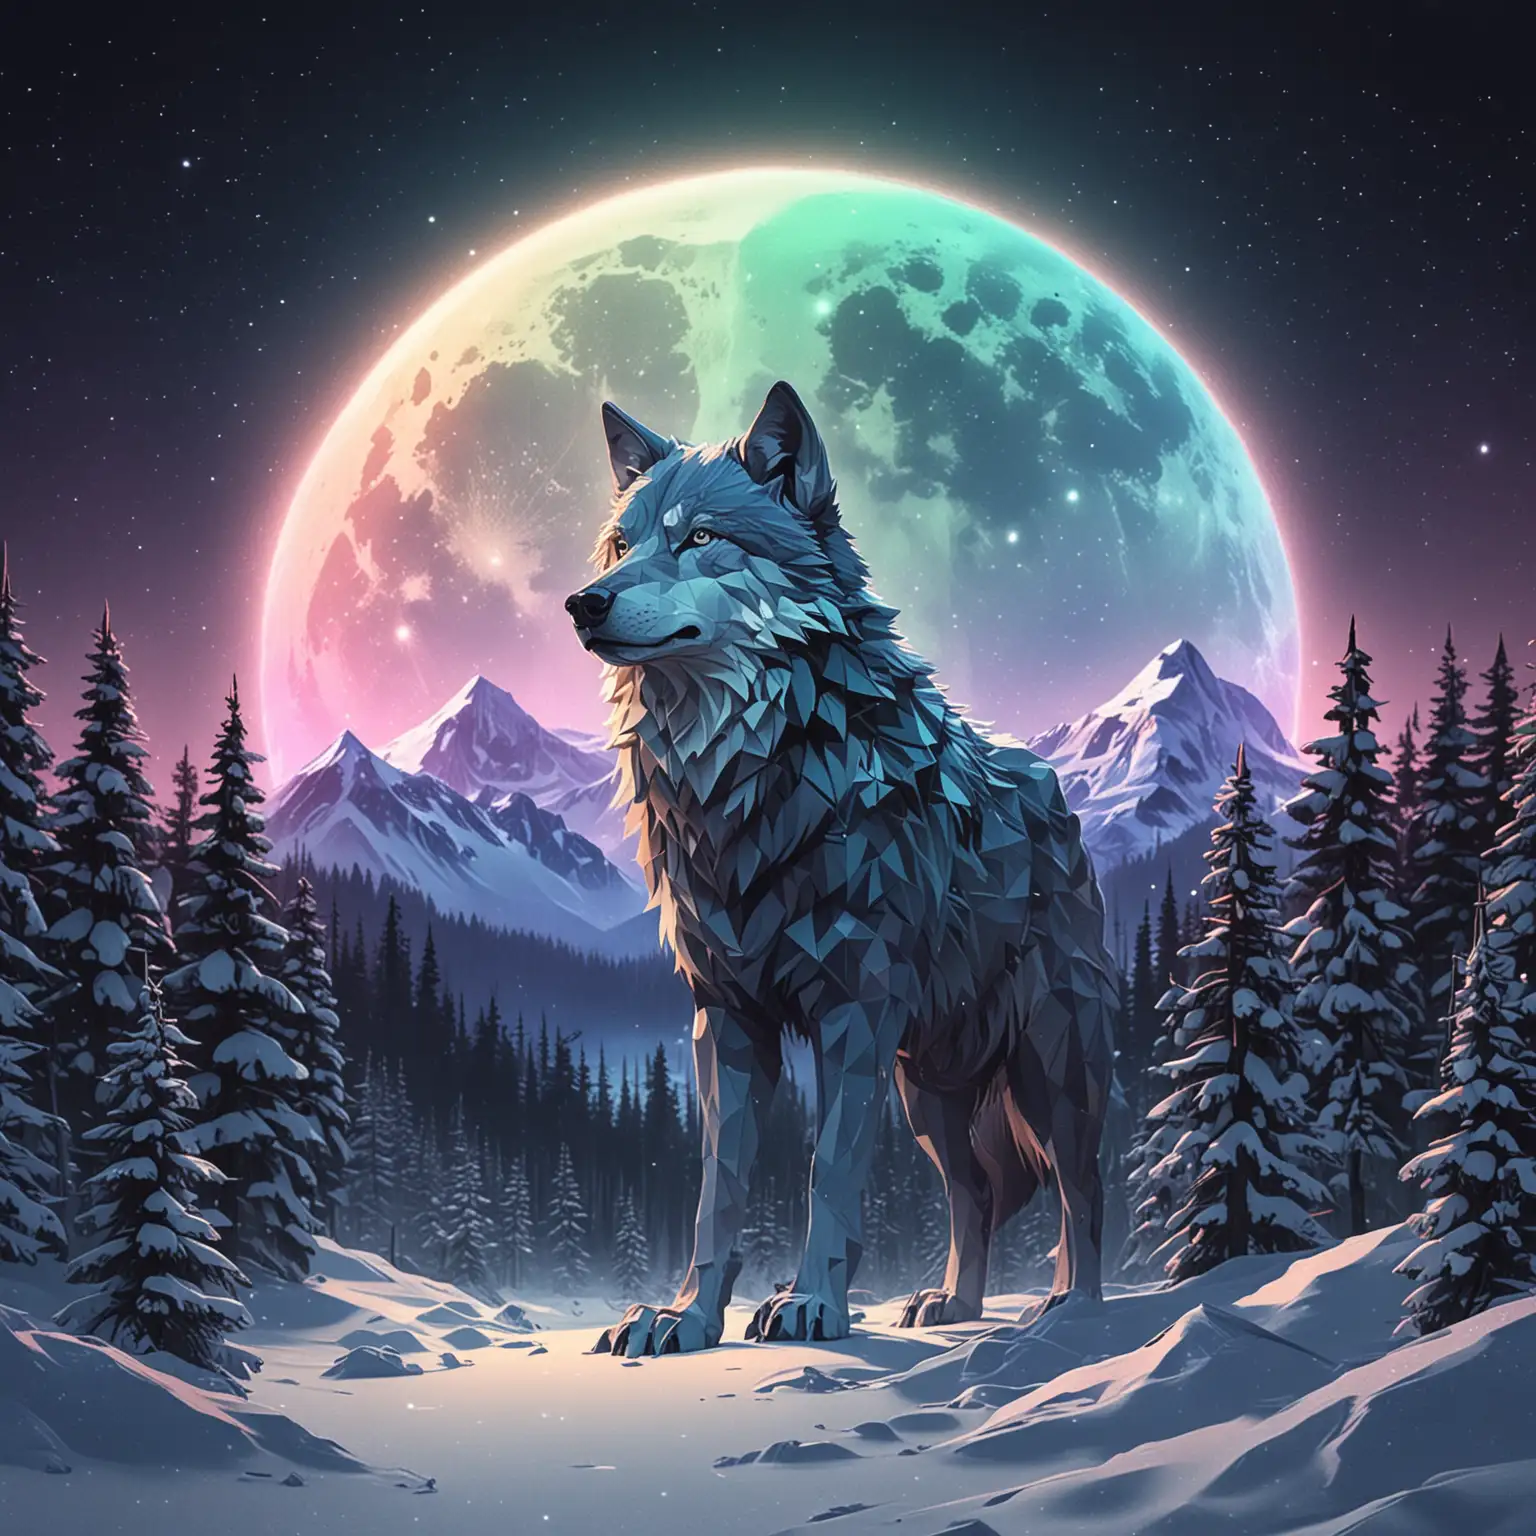 Digital-Art-Wolf-Logo-in-Snowy-Mountain-Forest-under-a-Full-Moon-with-Northern-Lights